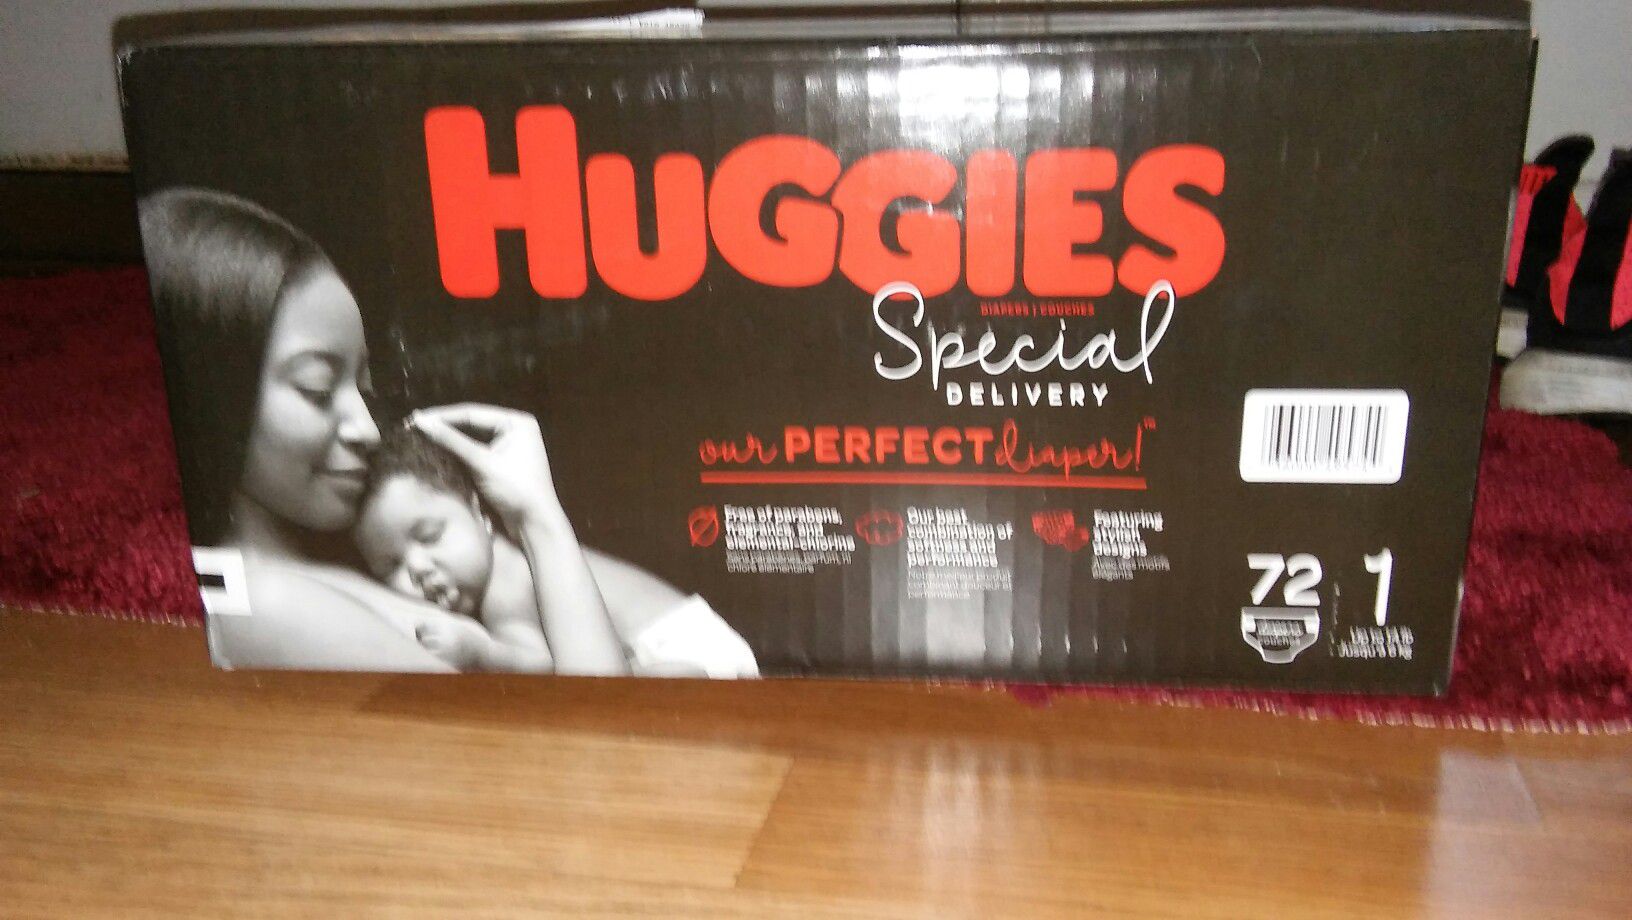 Box huggies special delivery #1